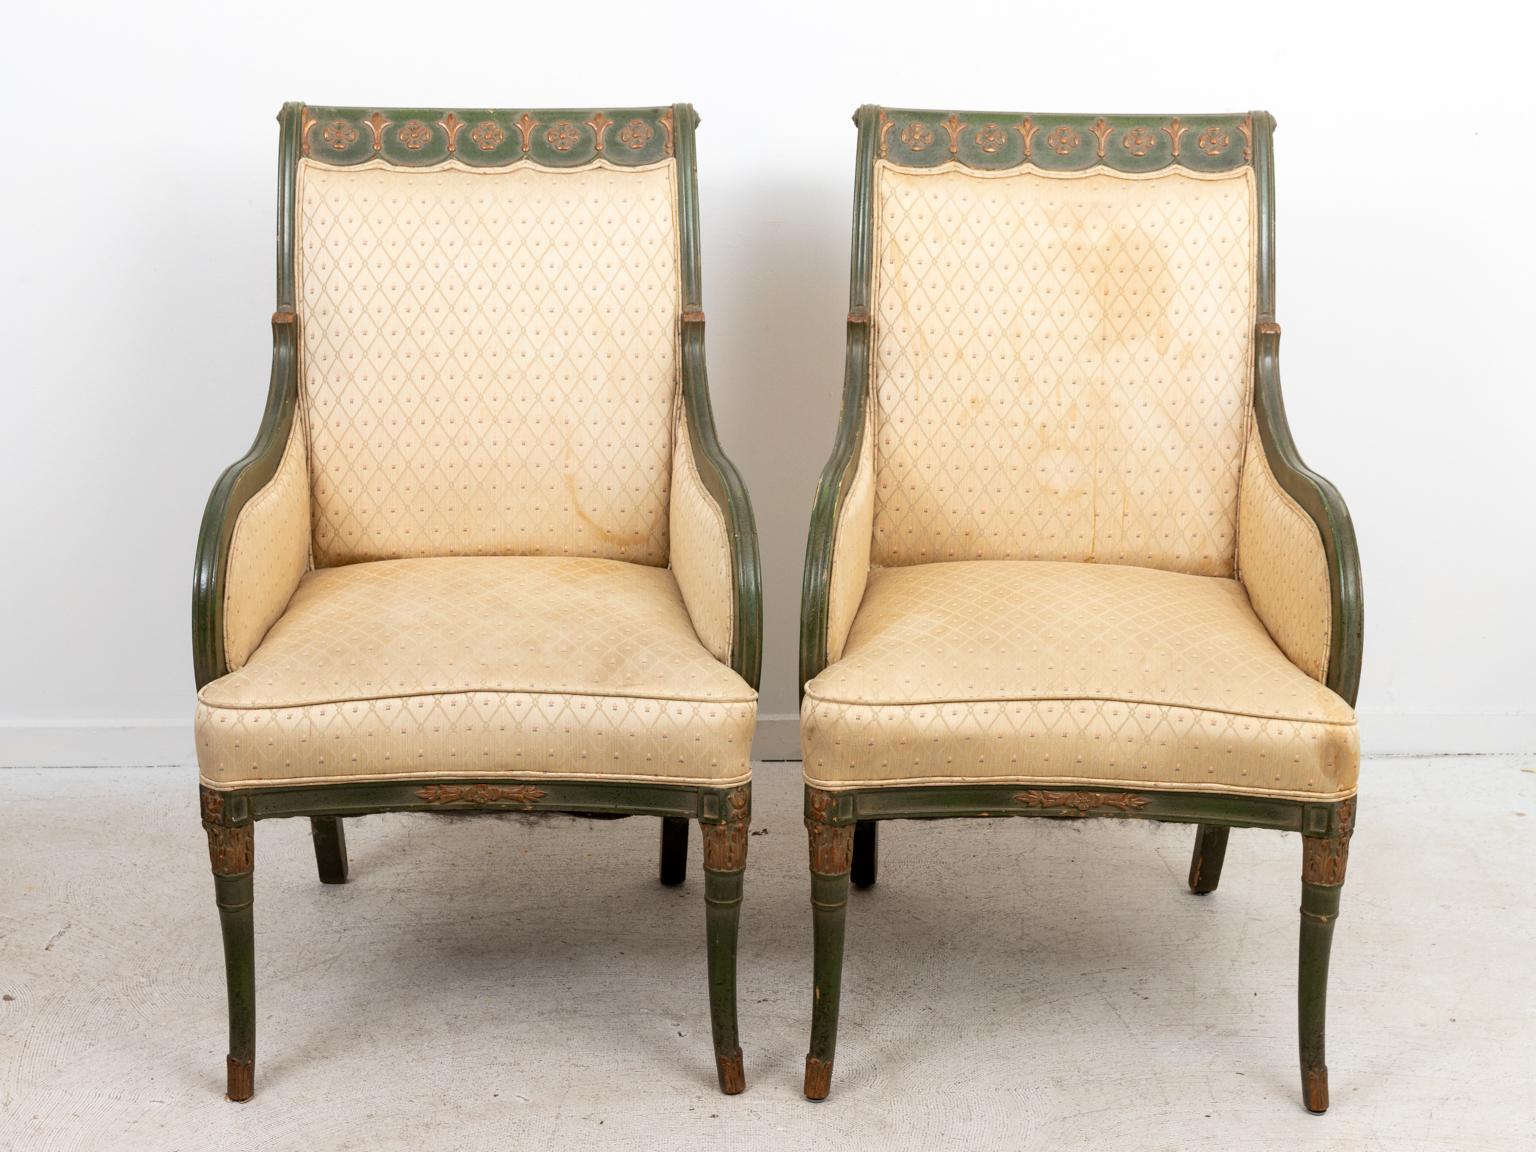 Pair of French Empire style upholstered armchairs carved and painted floral trim on the top of the seat backs and legs. Please note of wear consistent with age including paint loss and finish loss, there is also evidence of staining on the